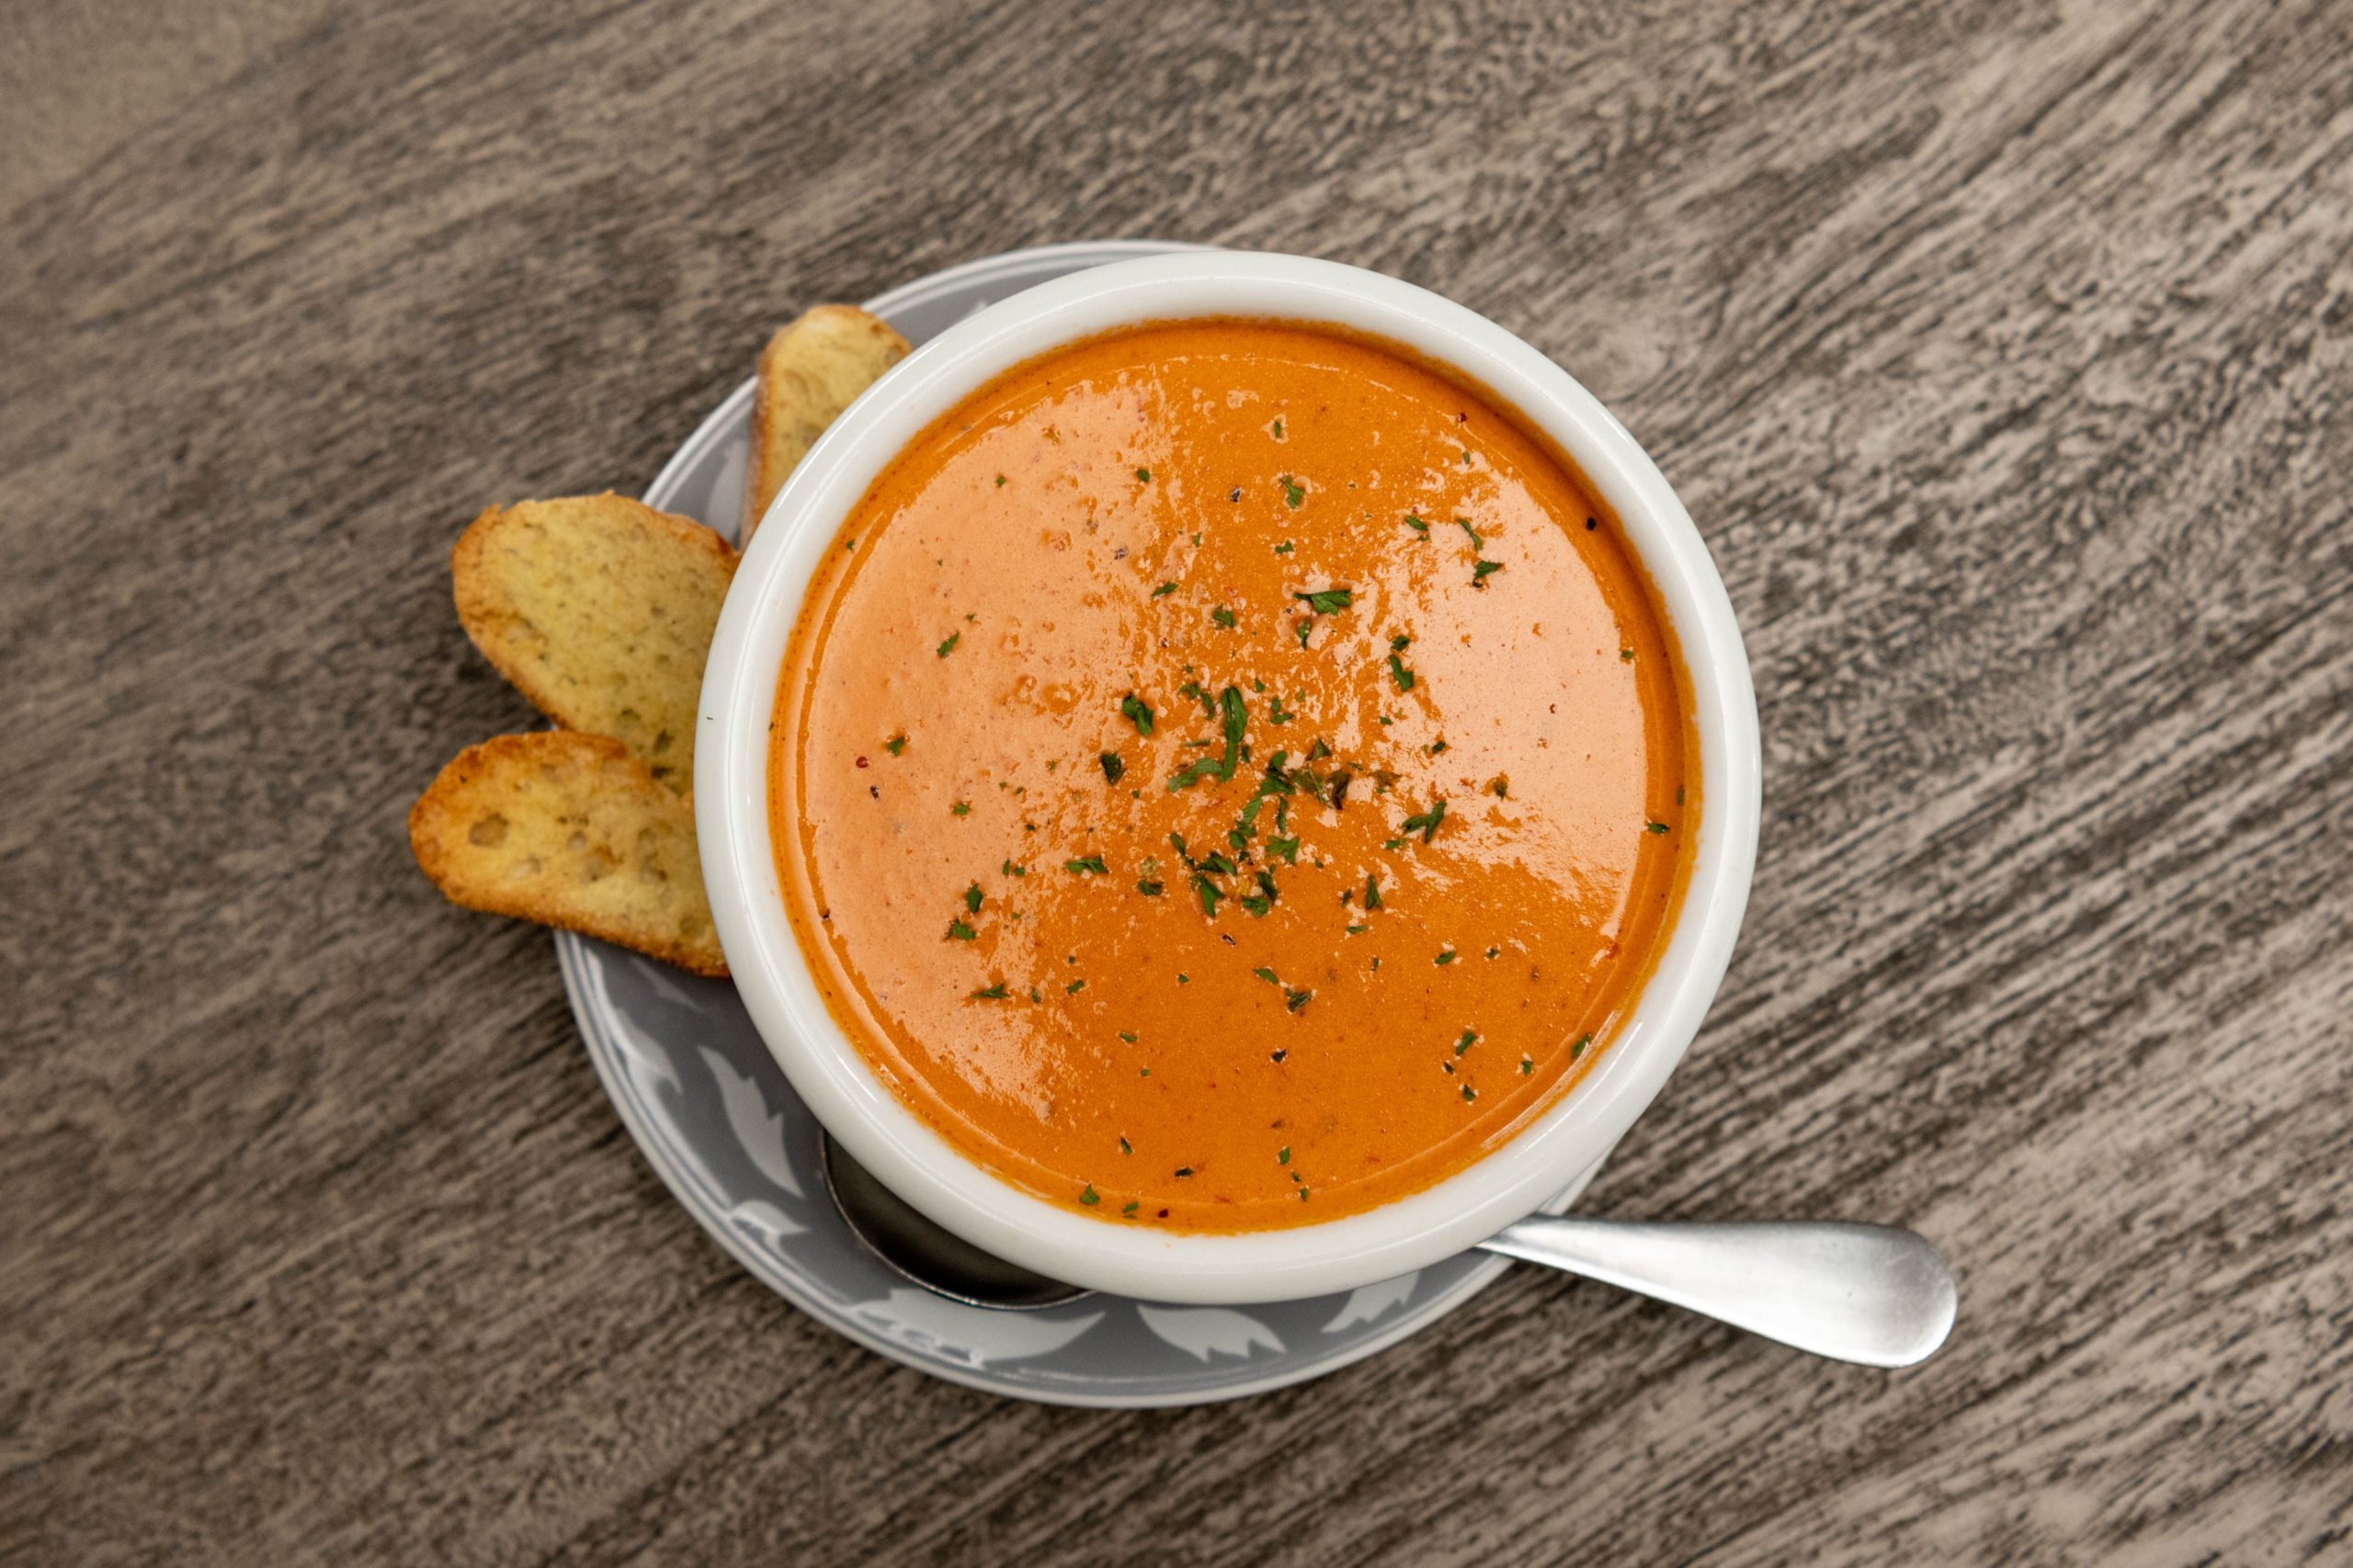 Tomato bisque soup is a favorite at Bistro 1605 in High Point, NC.